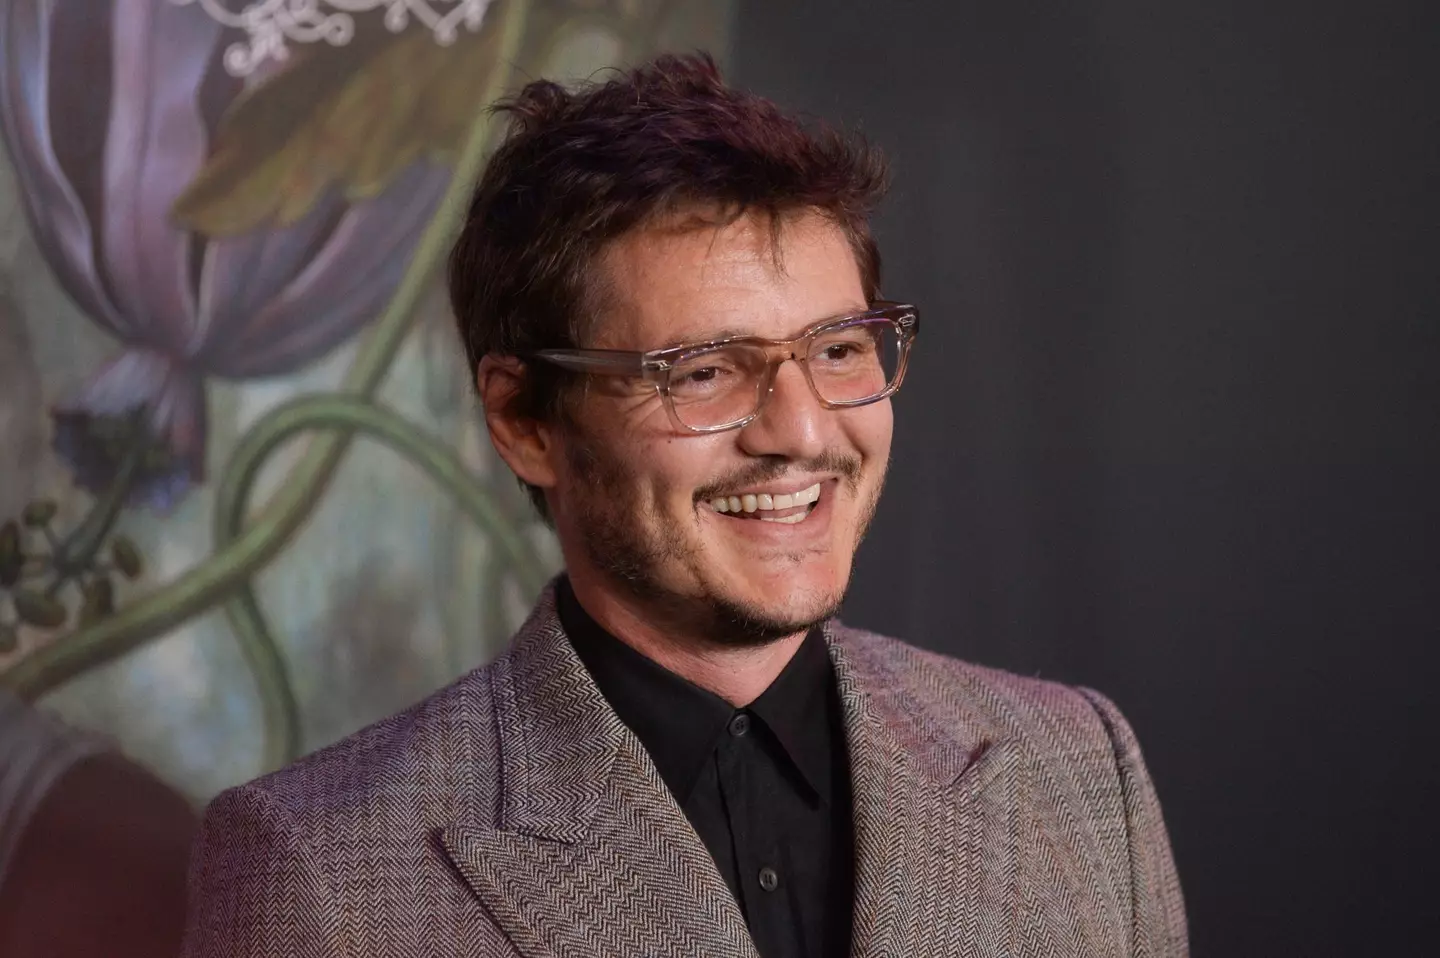 Pedro Pascal is now known for his roles in hits such as Narcos and, more recently, The Last of Us.